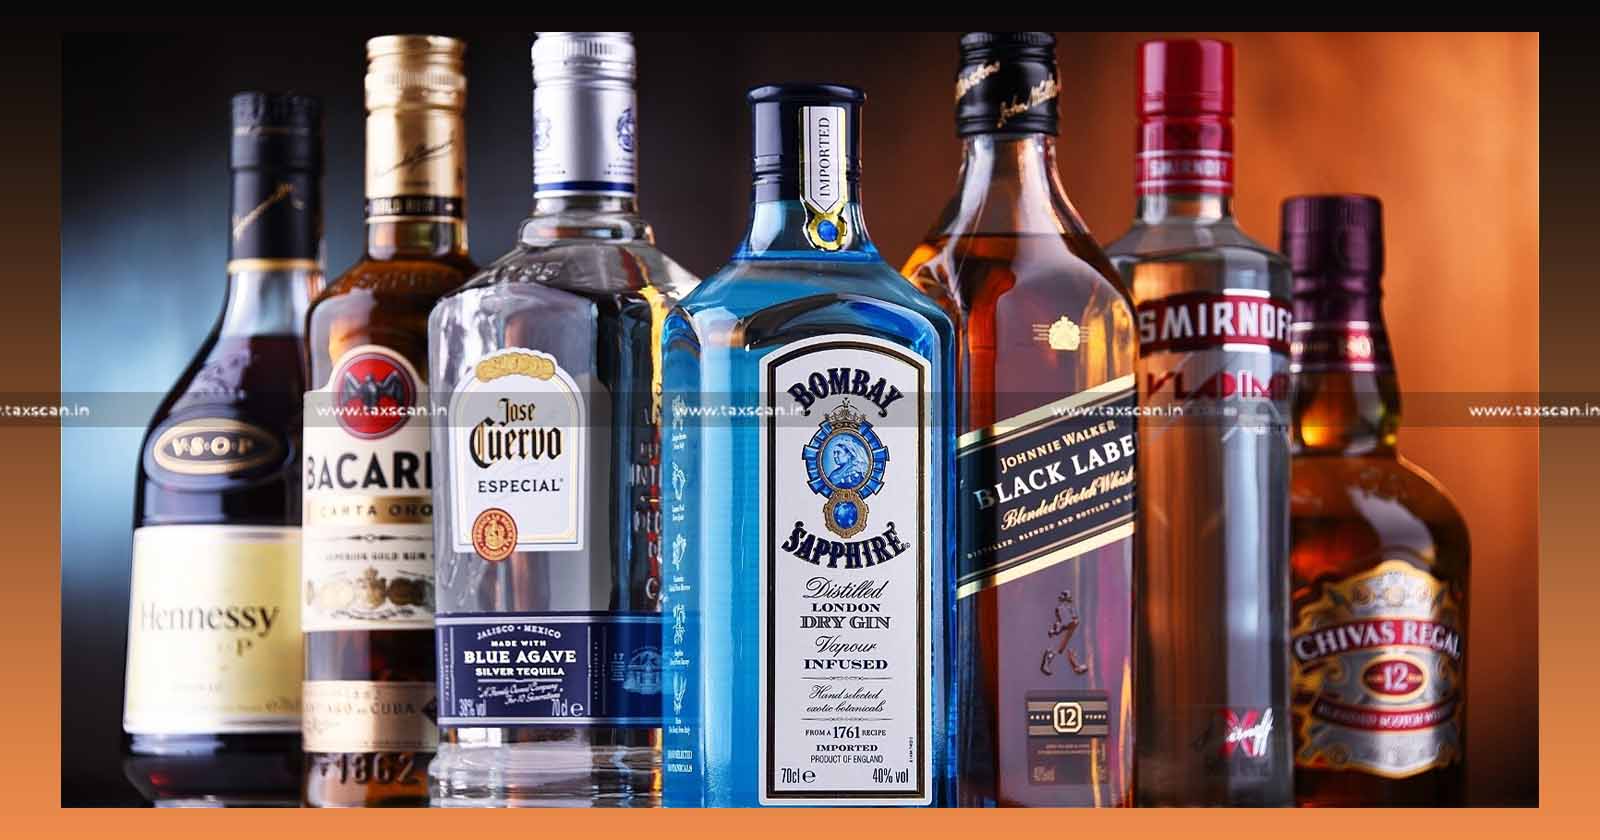 Indian Made Foreign Liquor - Foreign Liquor - Reversed Entry Act of 2007 - Reversed Entry Act - Allahabad High Court - Entry Tax Demand - Entry Tax - Tax Demand - taxscan